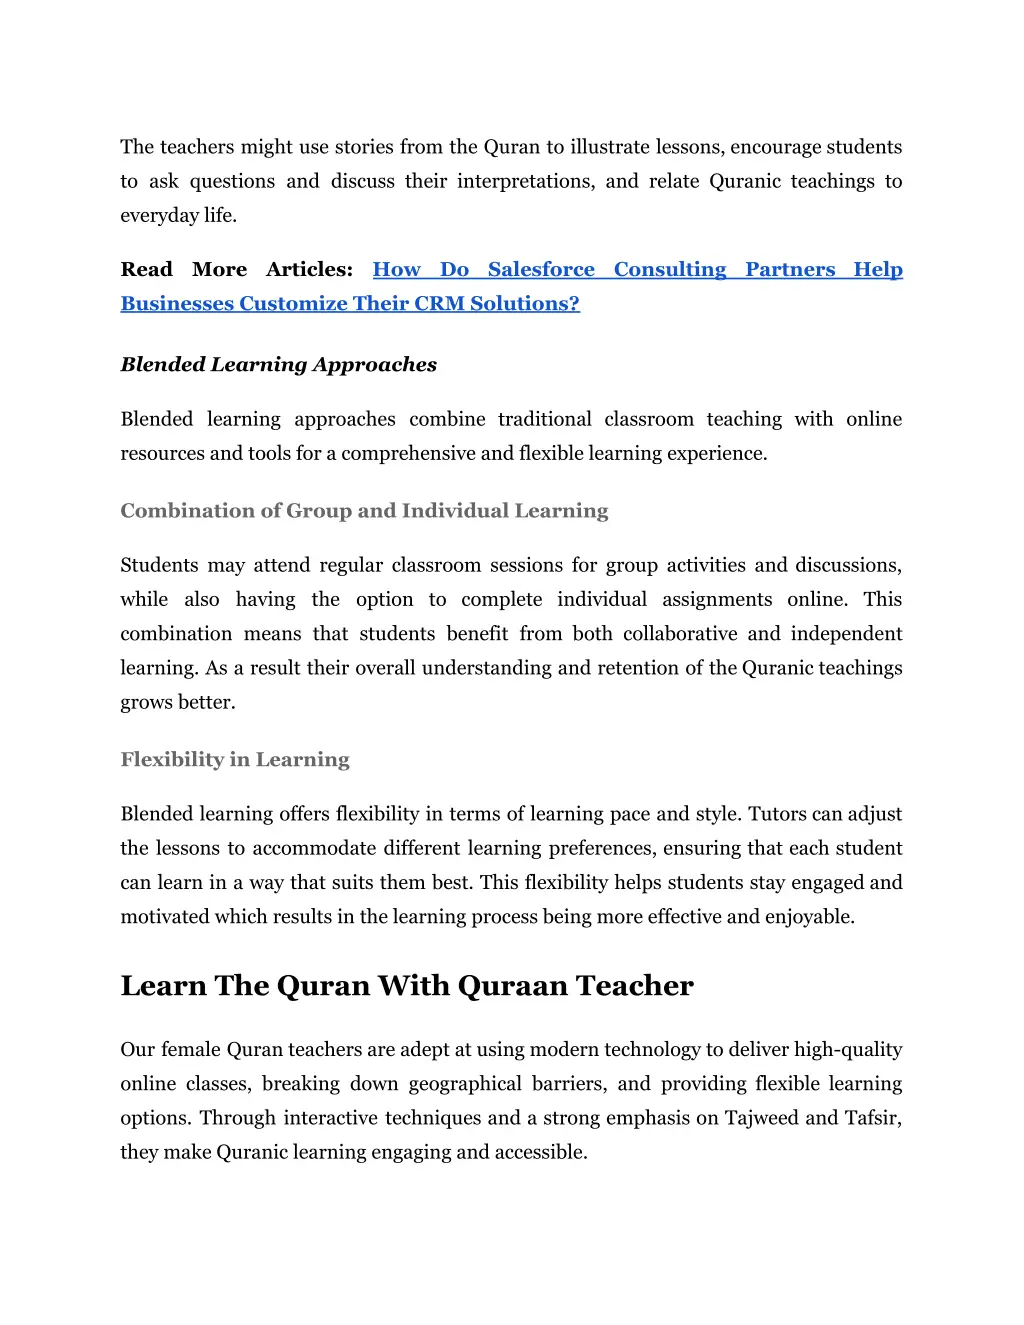 the teachers might use stories from the quran